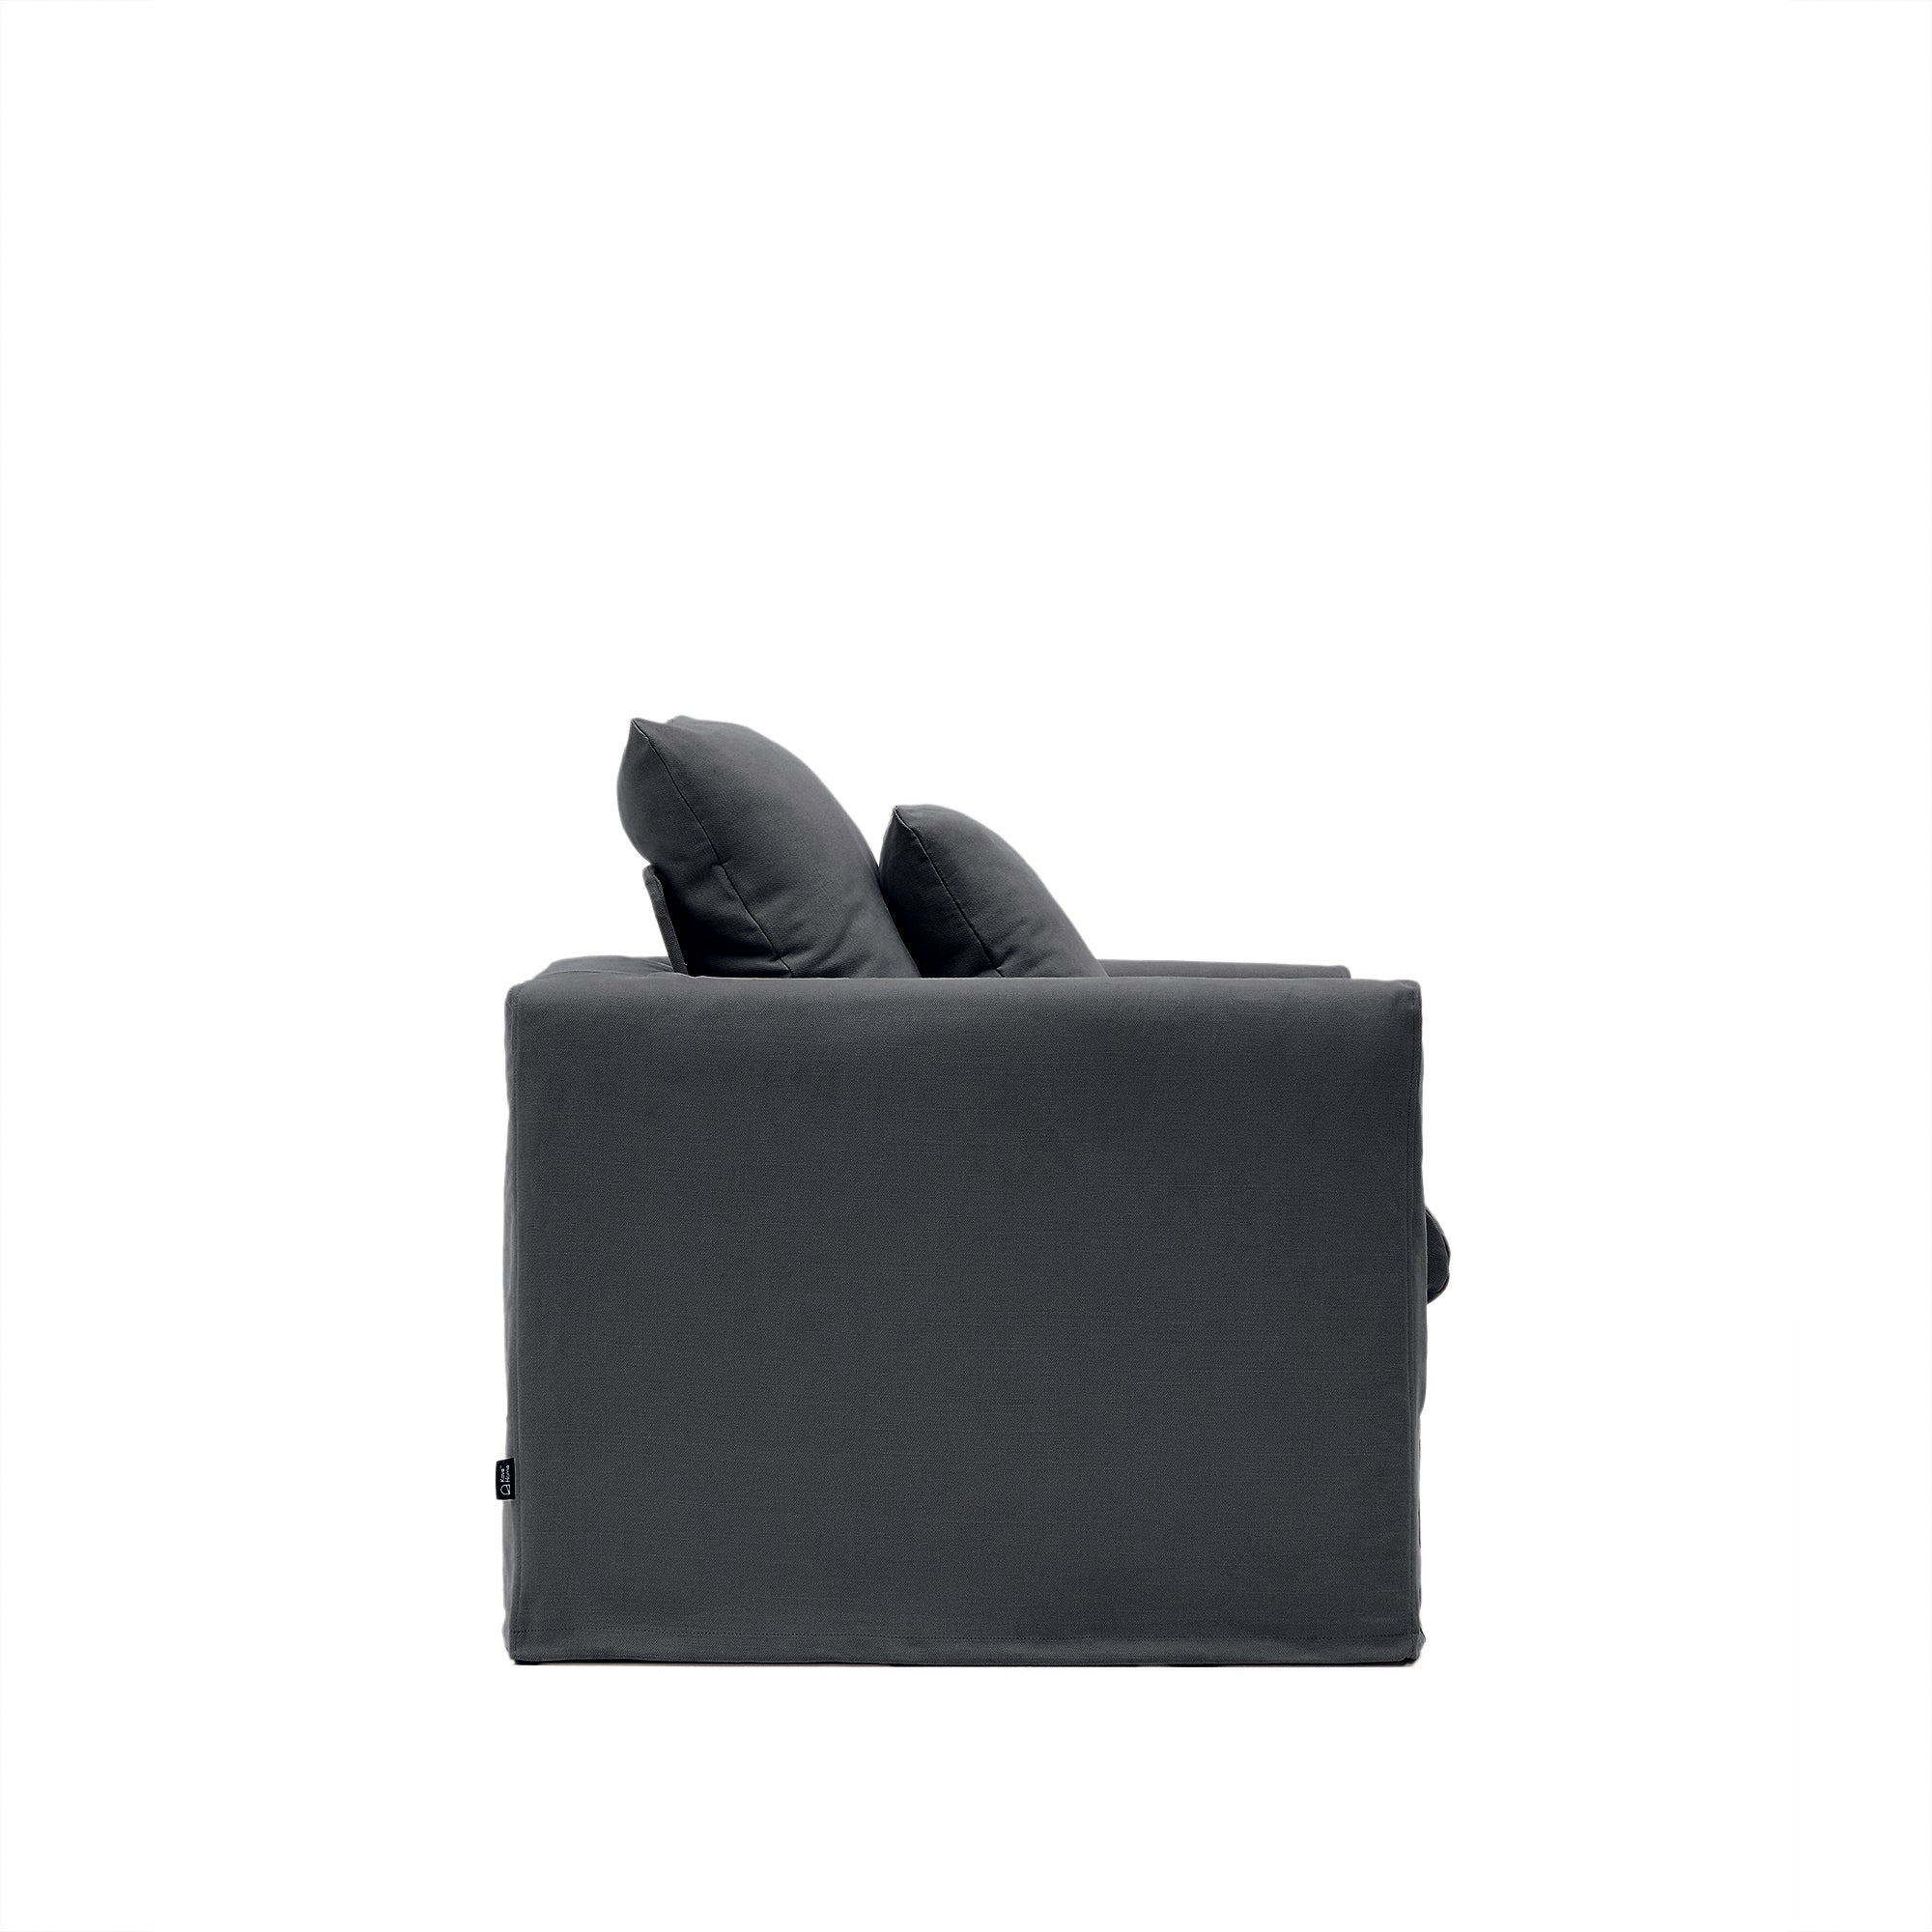 Nora armchair with removable cover and anthracite gray canvas and cotton cushion 92 cm